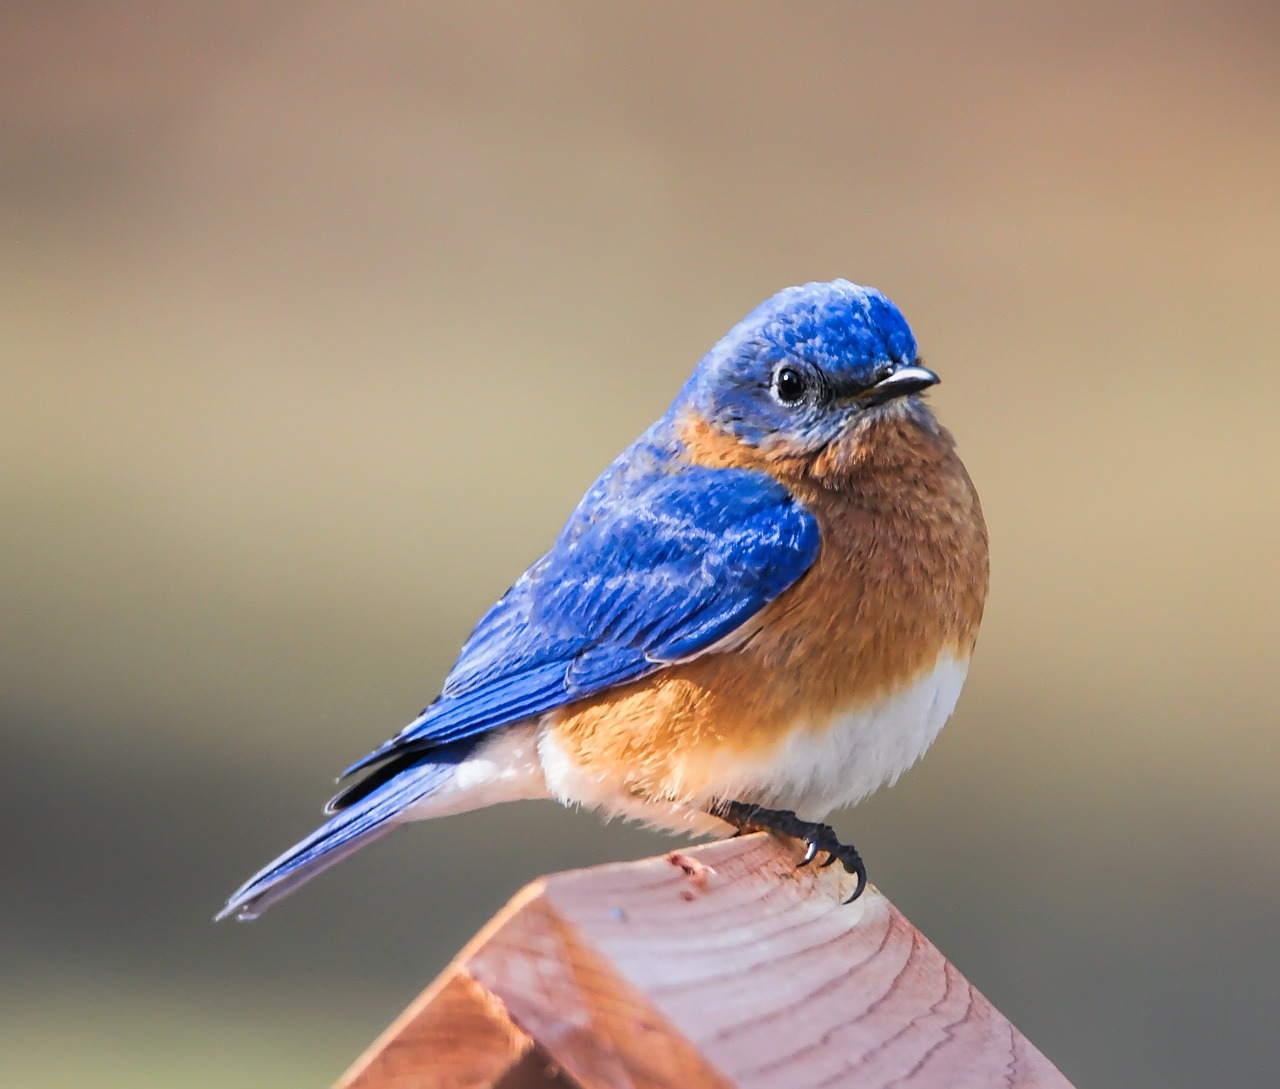 Small blue and rust-colored bird